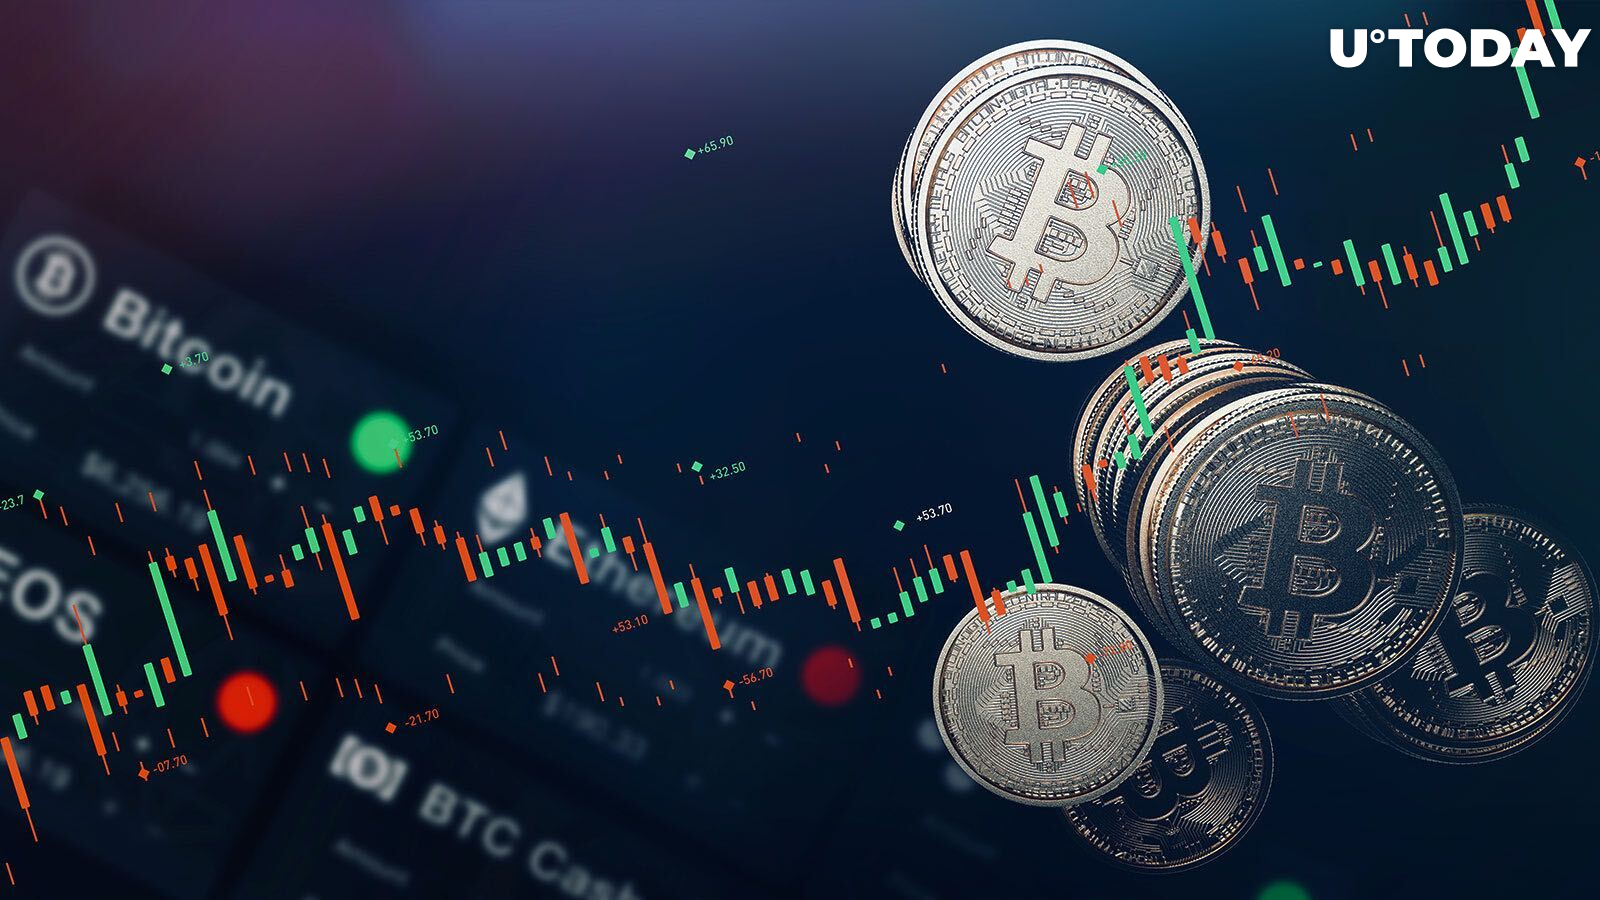 Bitcoin Breaks Important Level and Aims at $23,000 in Anticipation of Jackson Hole Event